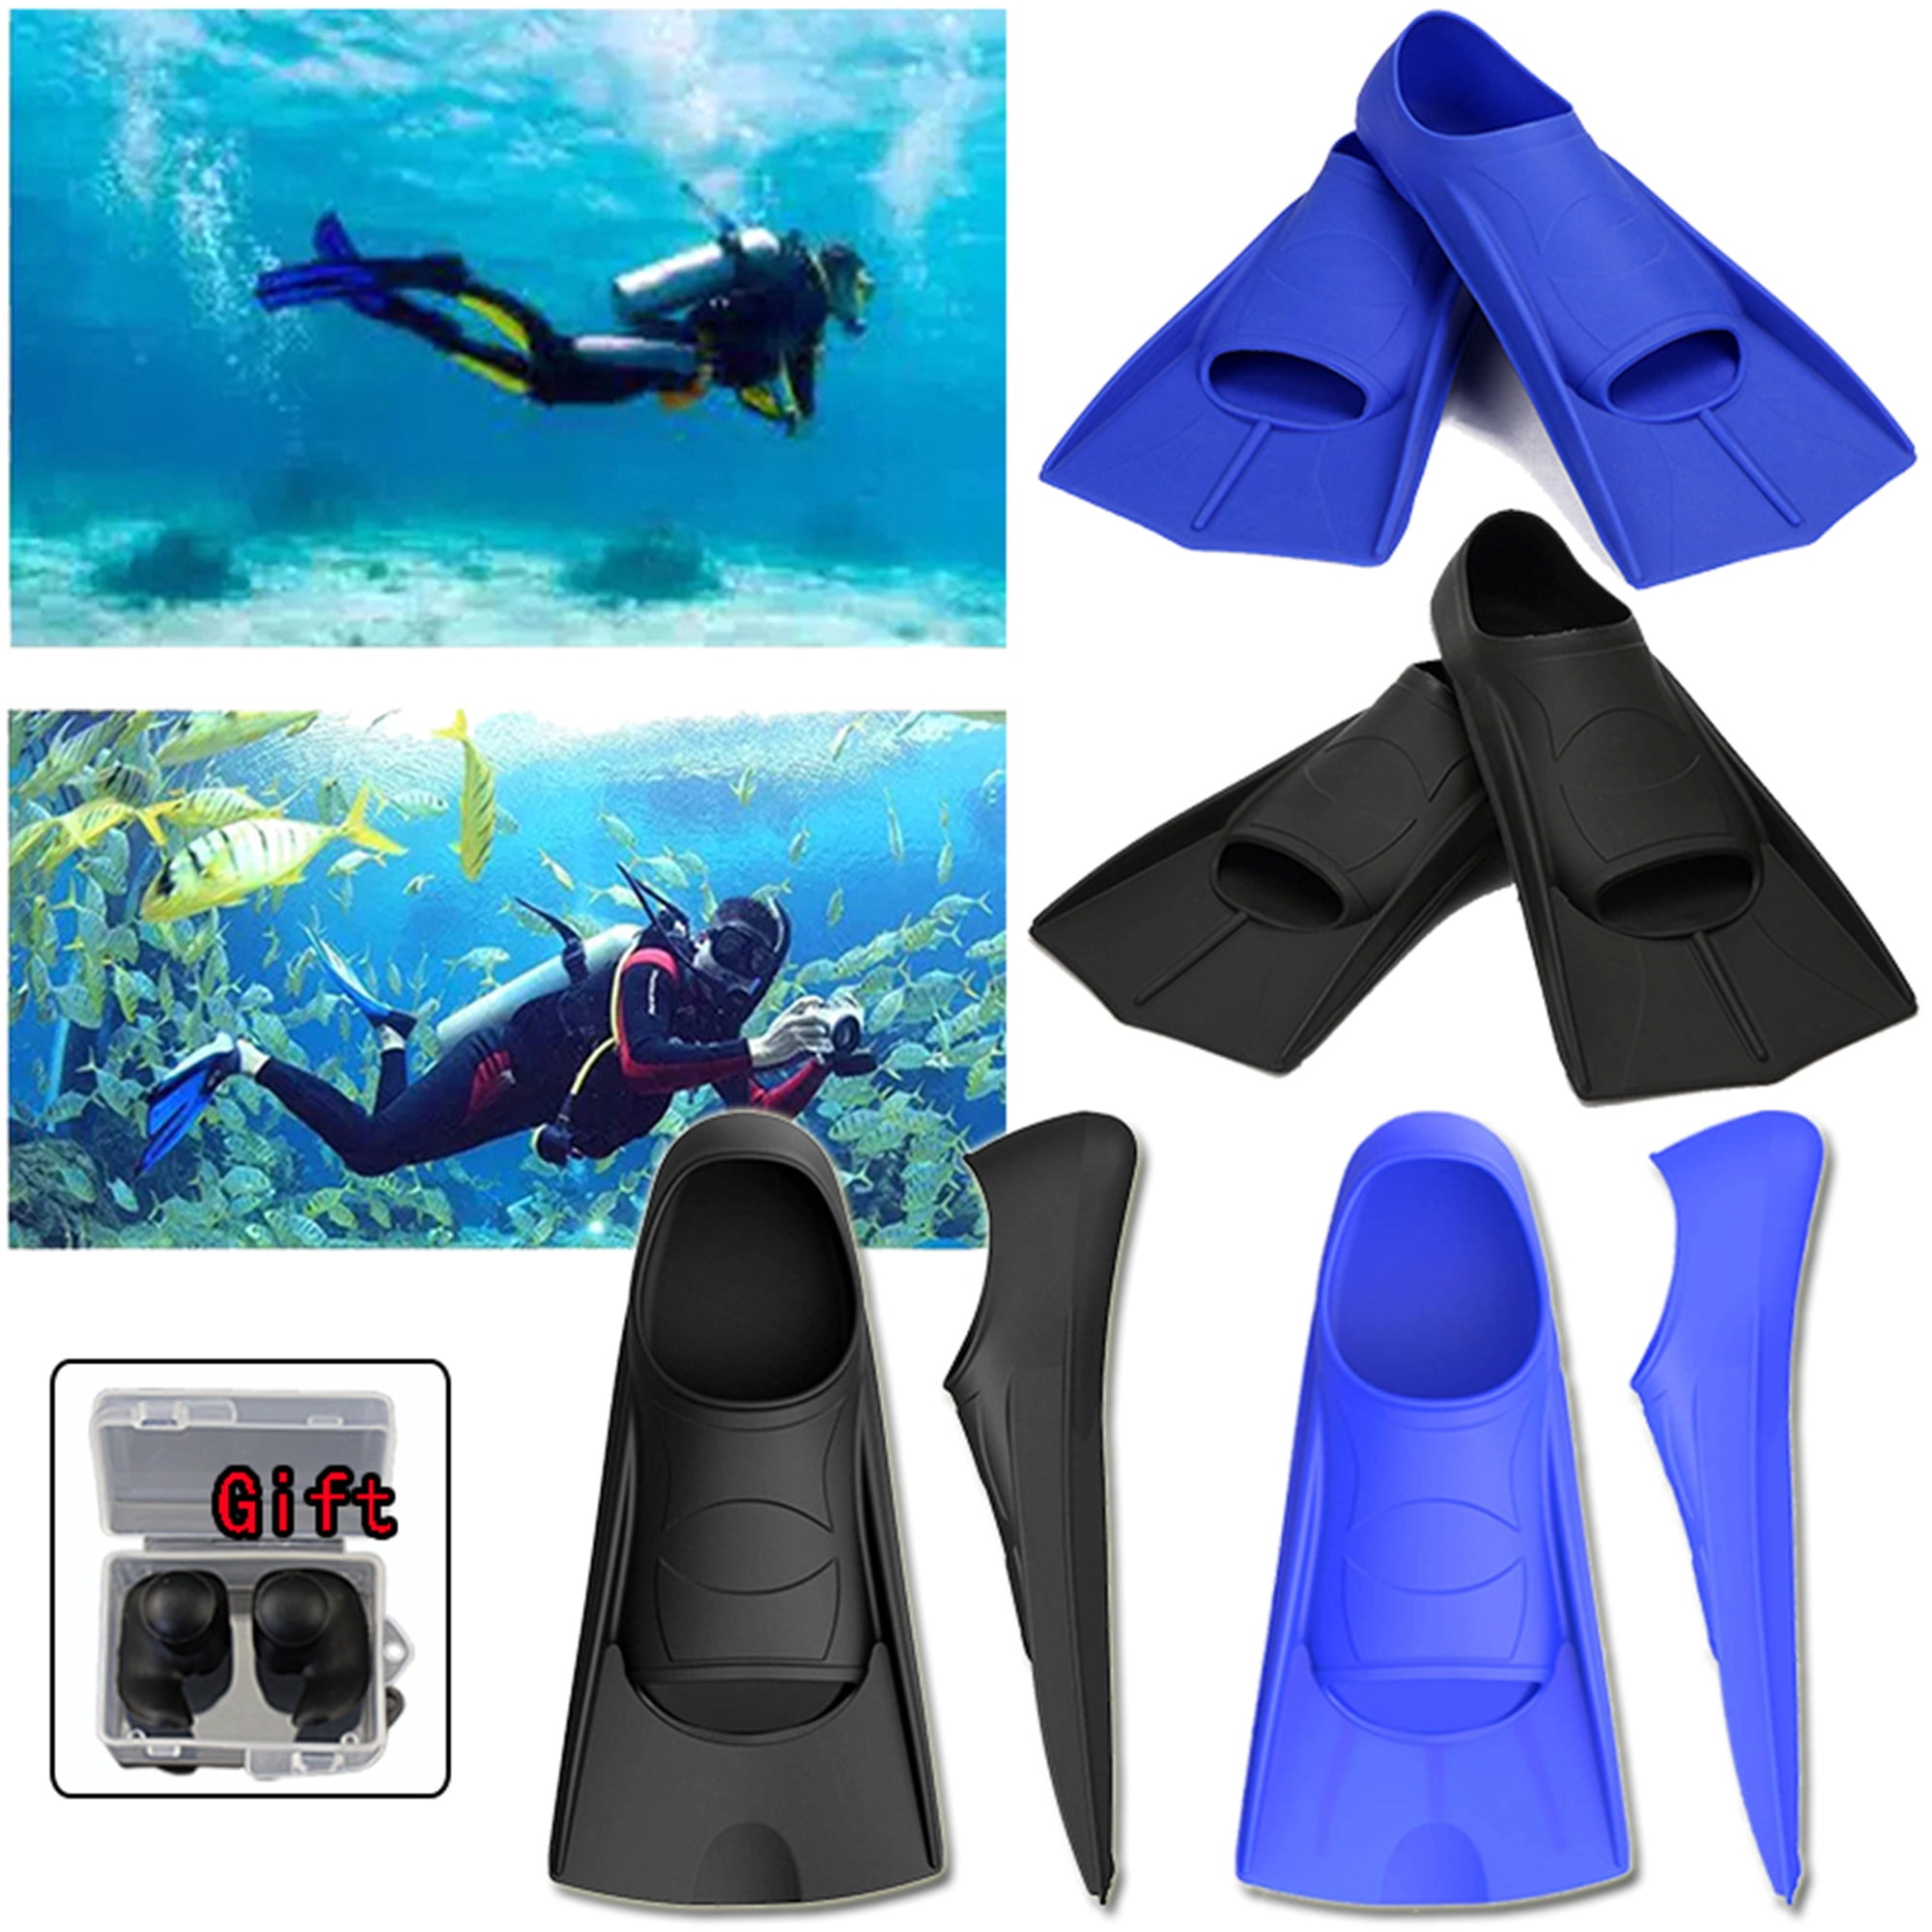 Kids Scuba Diving Swimming Training Learning Fins Flippers Gear Equipment 